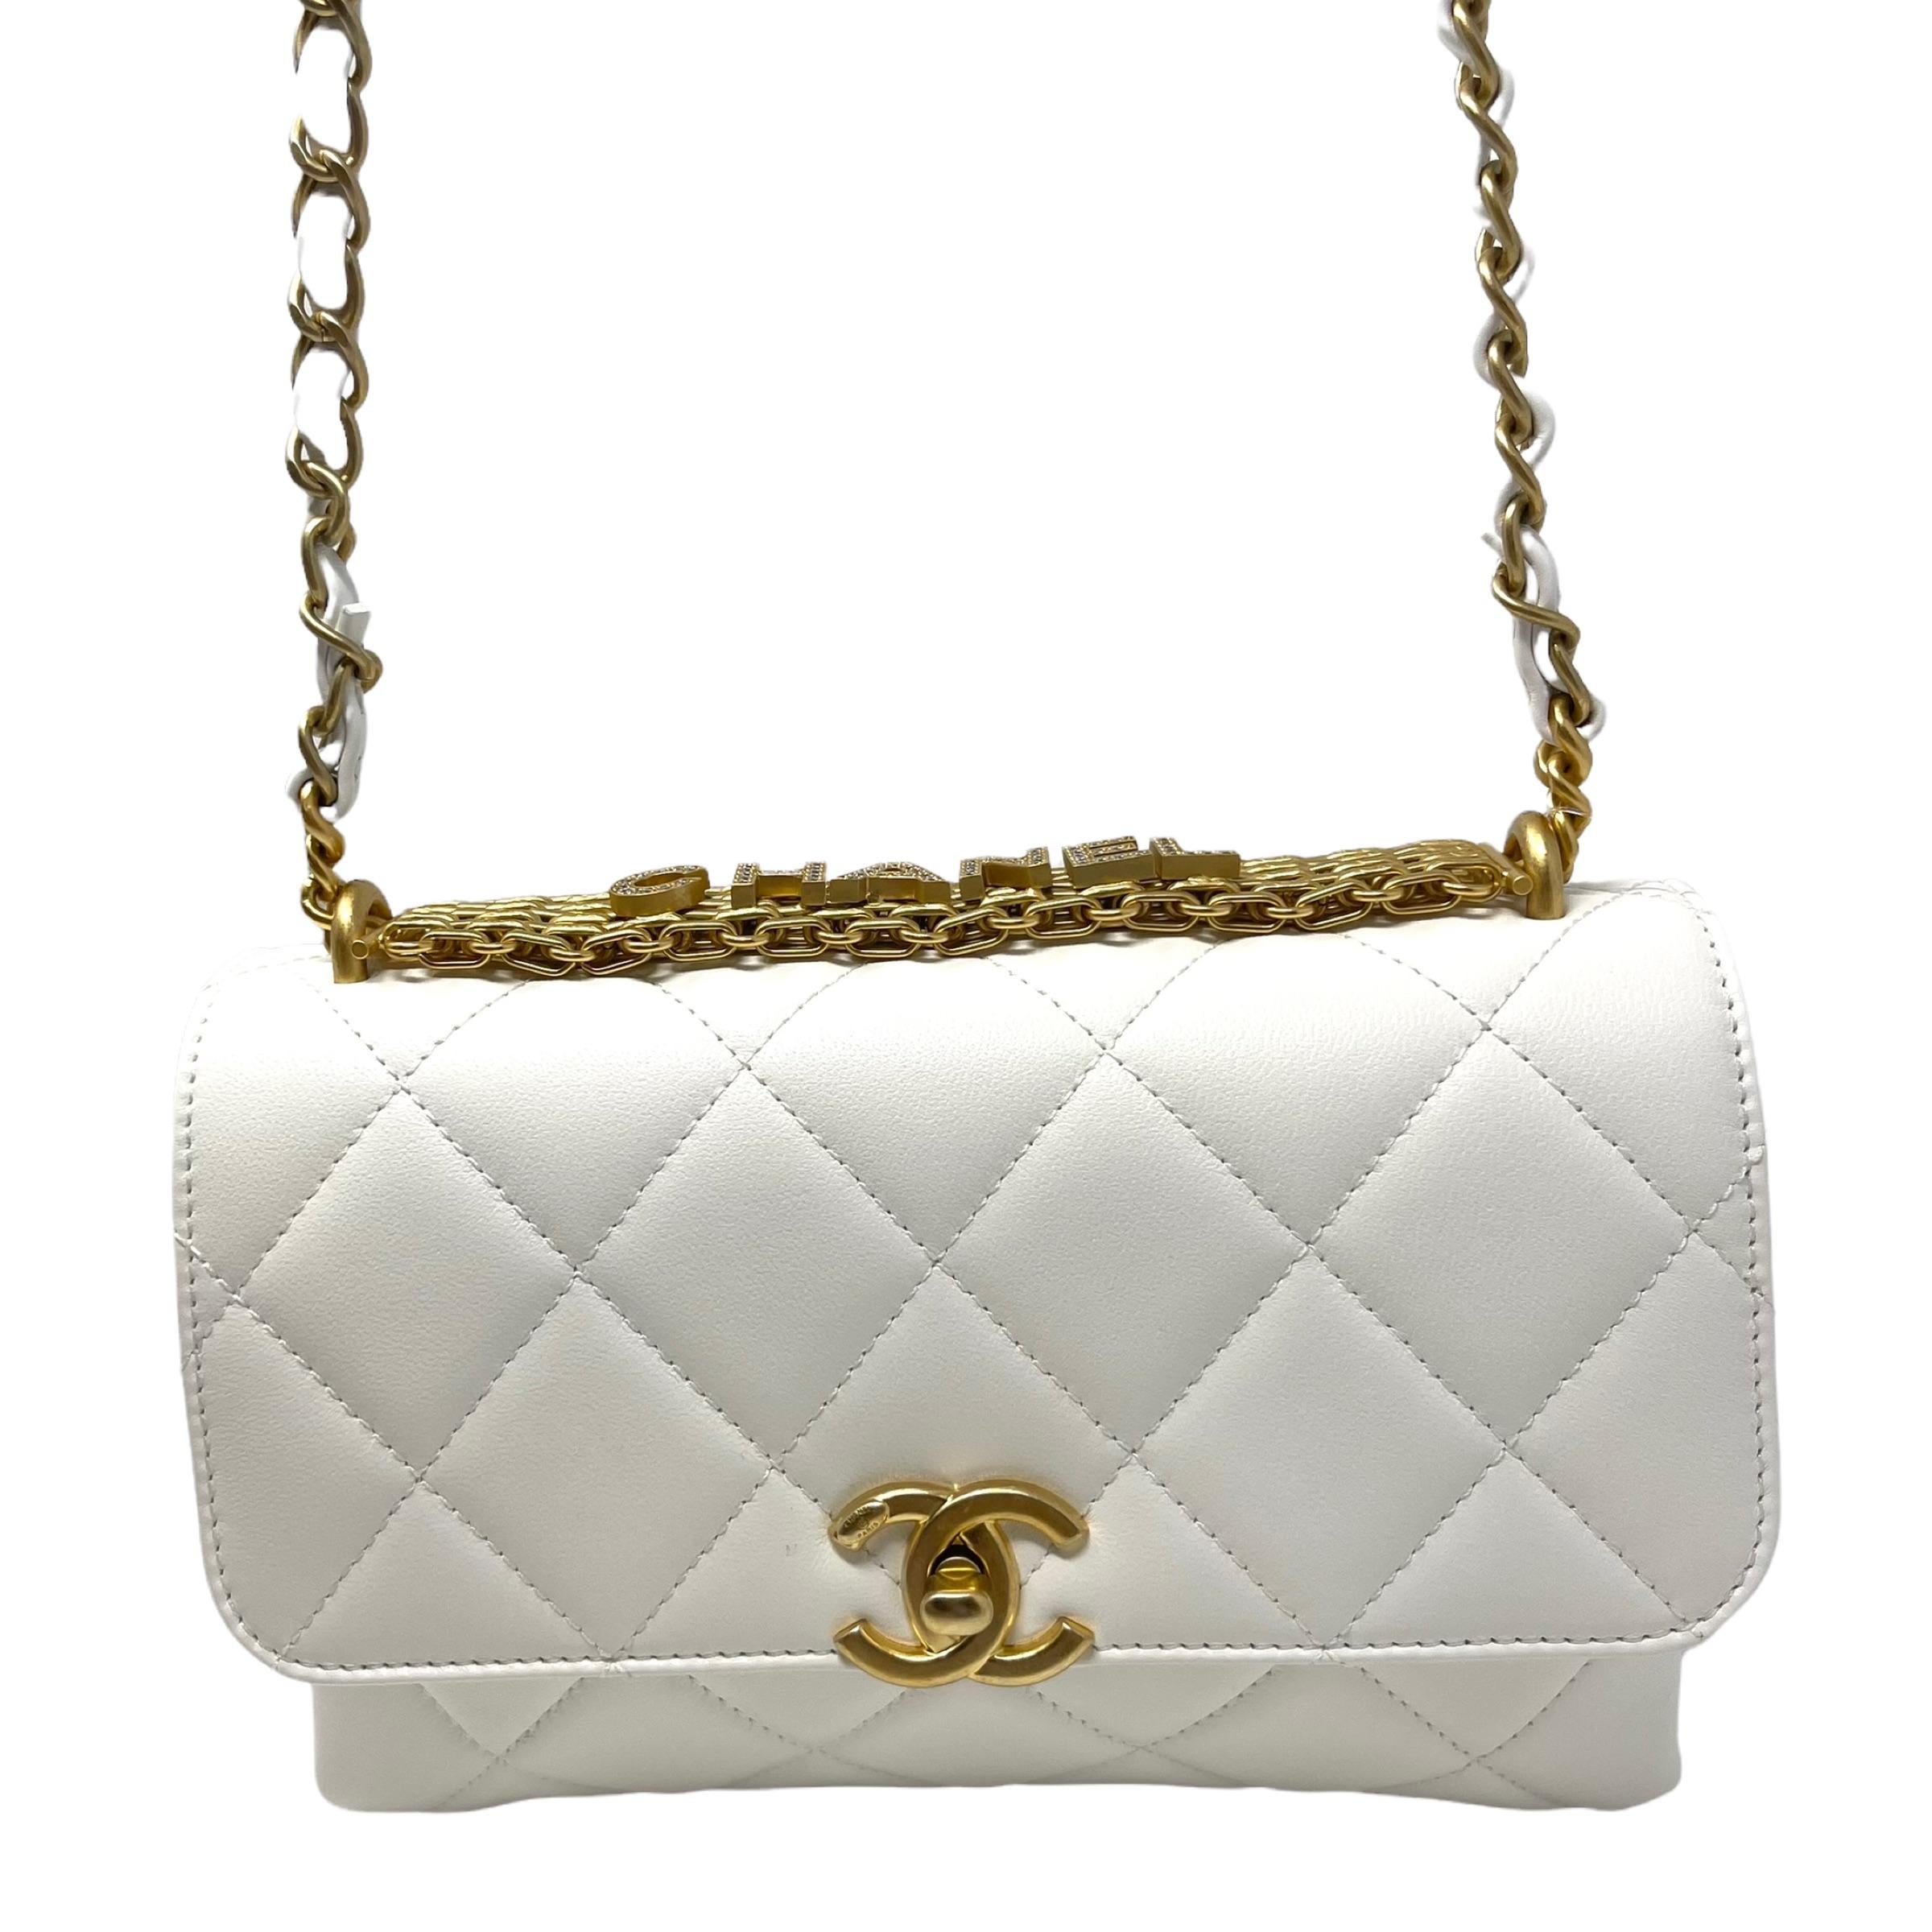 NEW Chanel White Small Flap Bag Quilted Leather Crossbody Bag For Sale 3